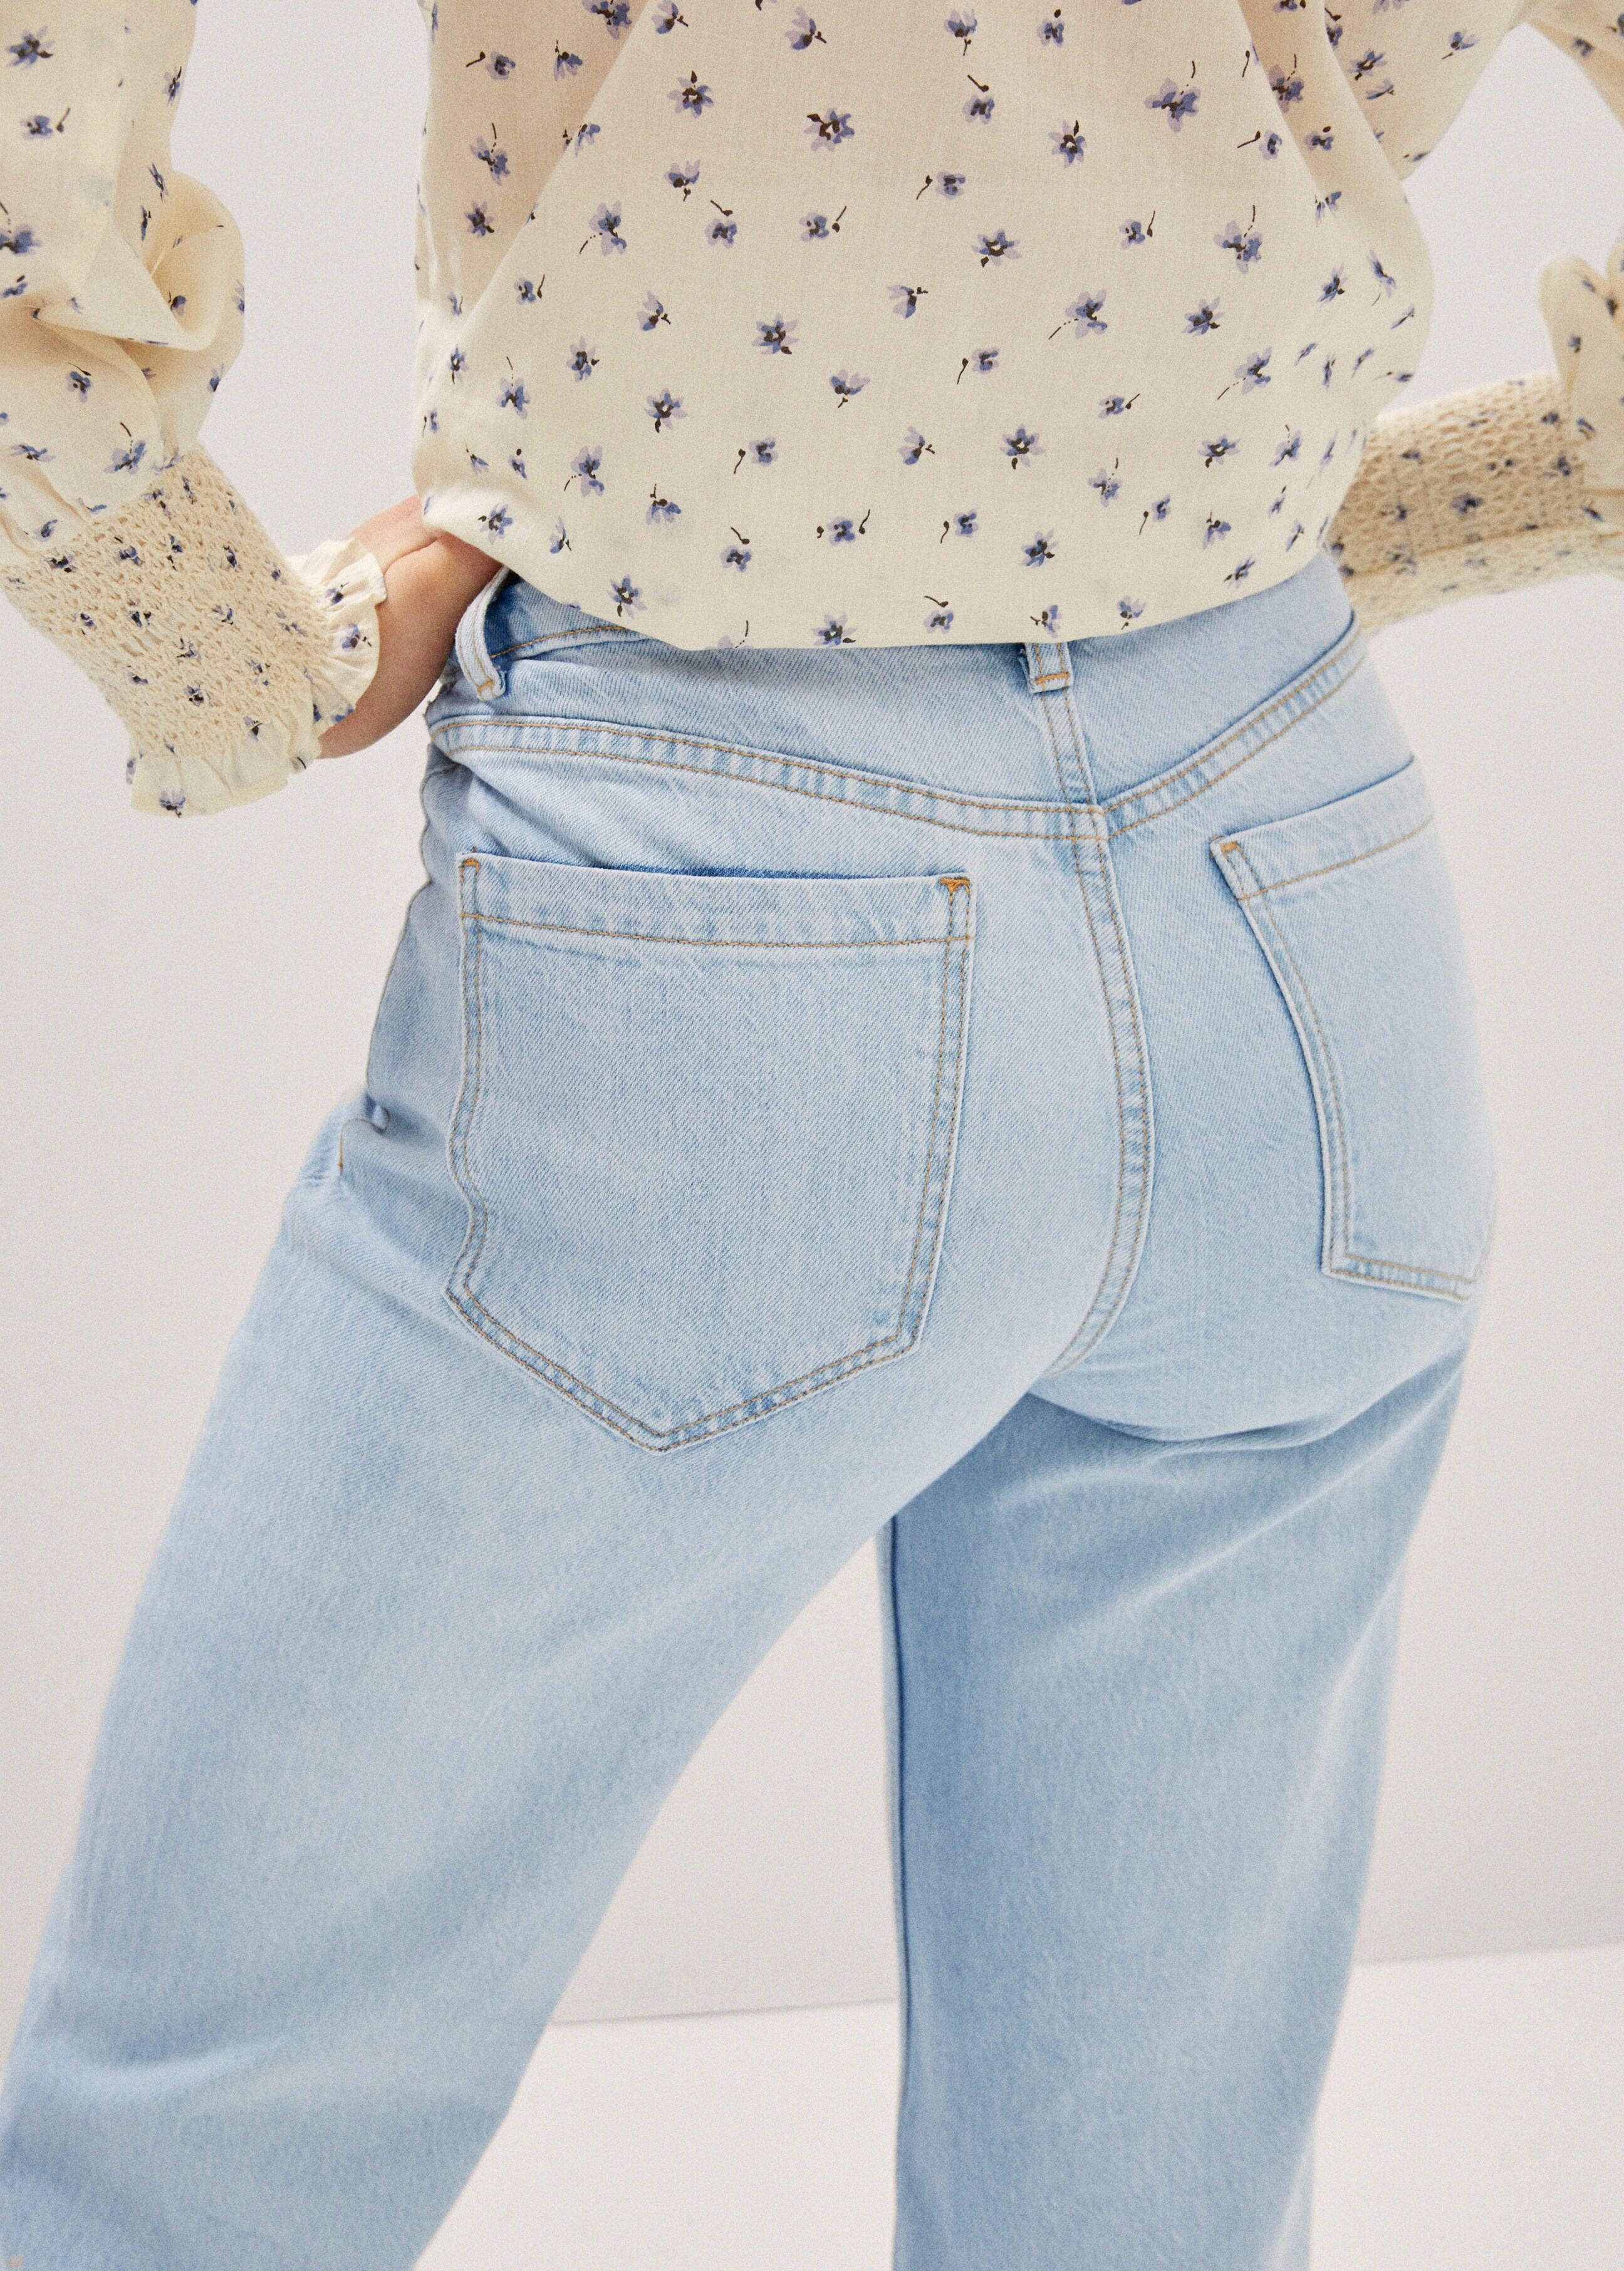 Wideleg jeans with pockets - Details of the article 2